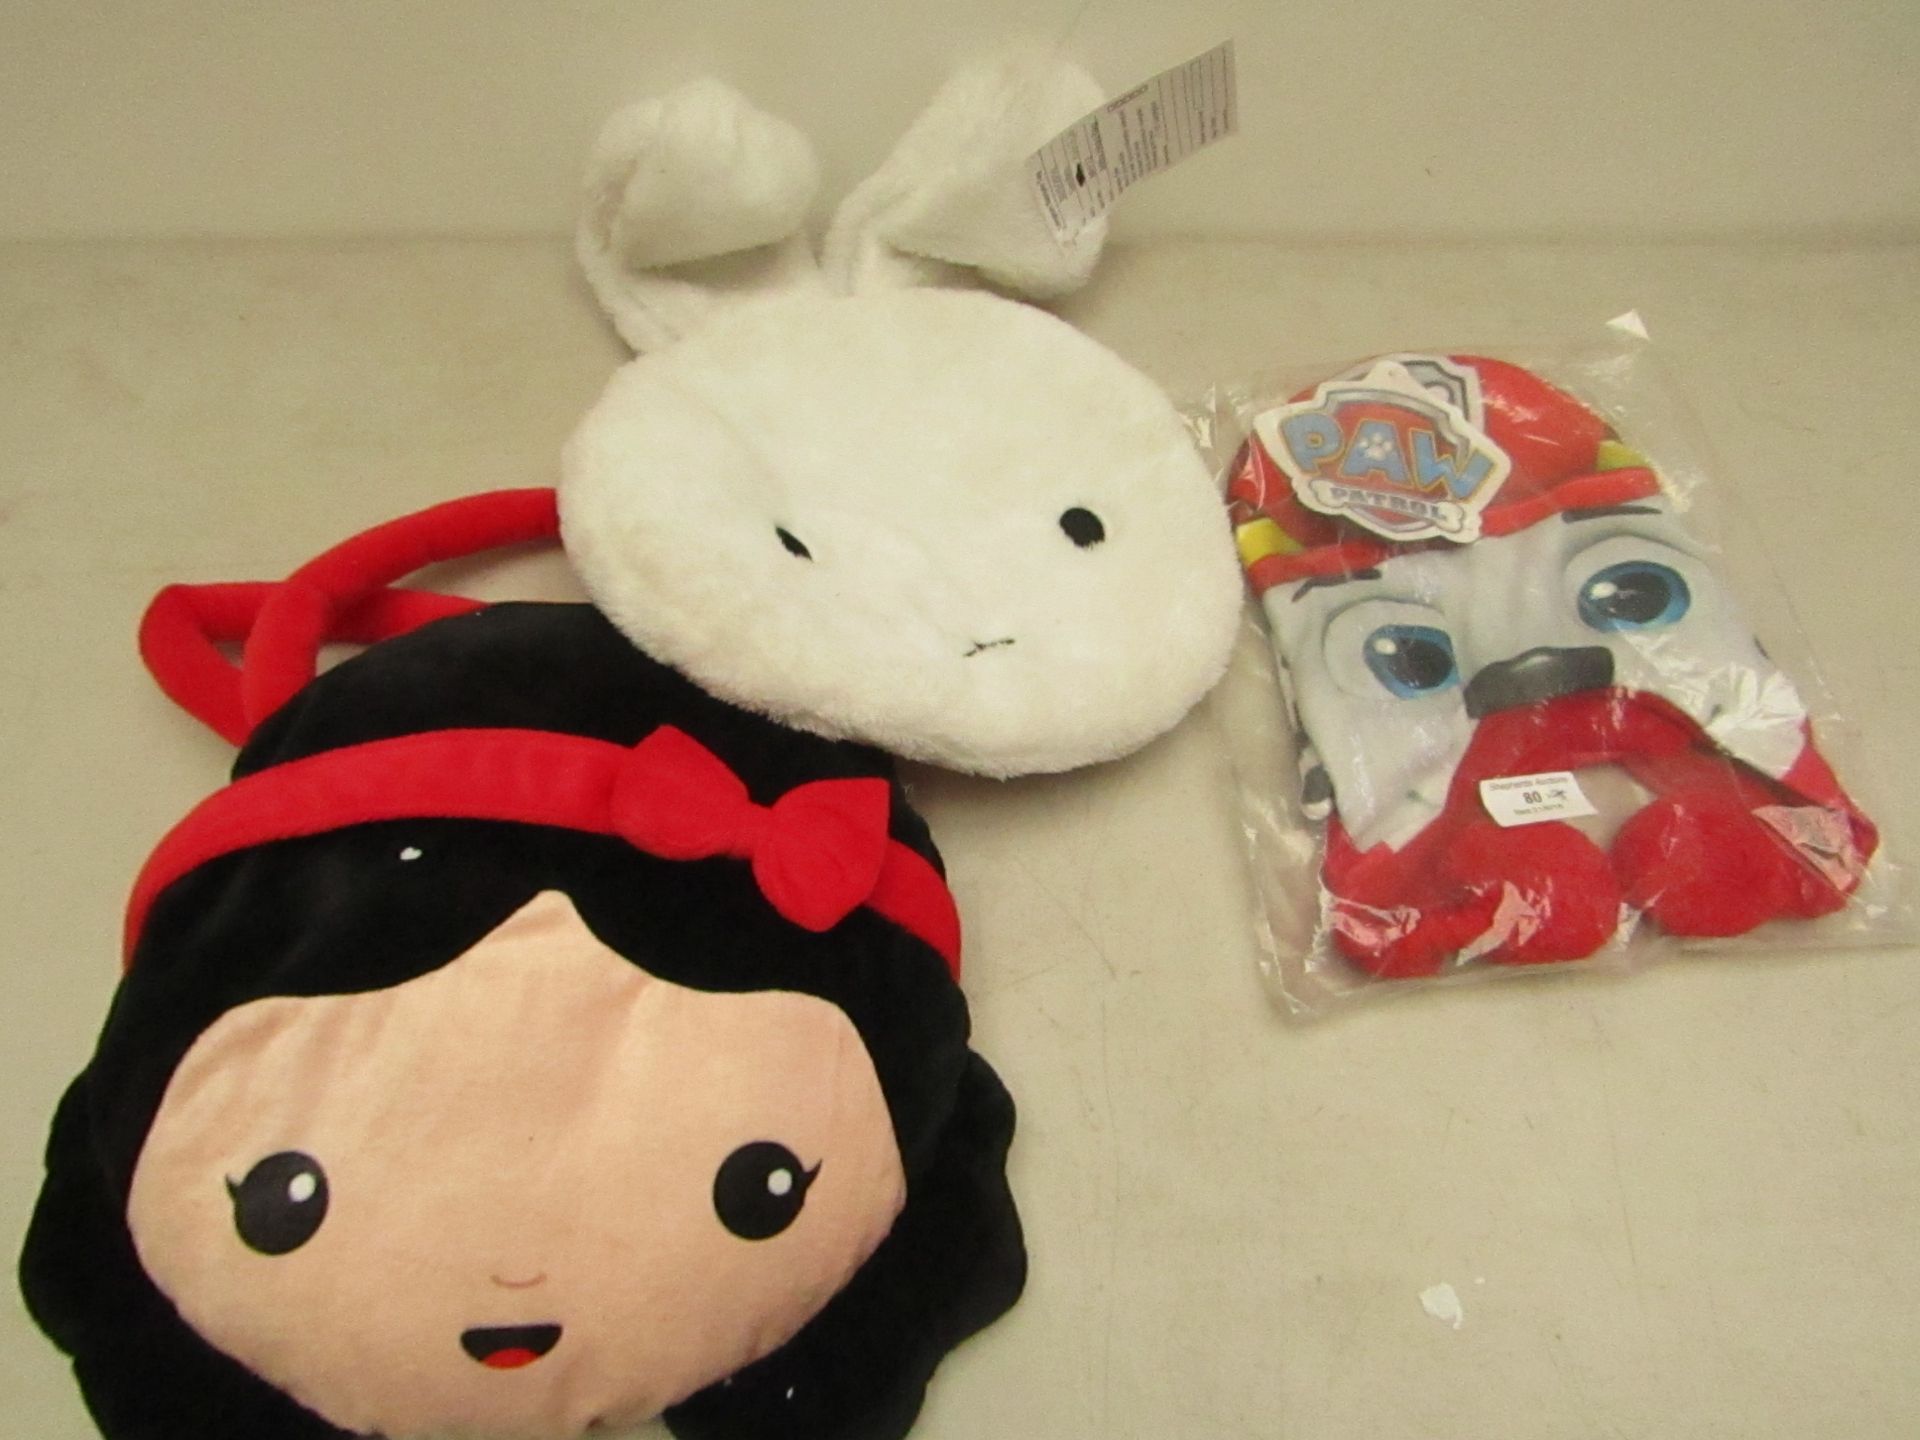 3x Items being.  - Paw Patrol hat.  - 2x Plush toy bags.